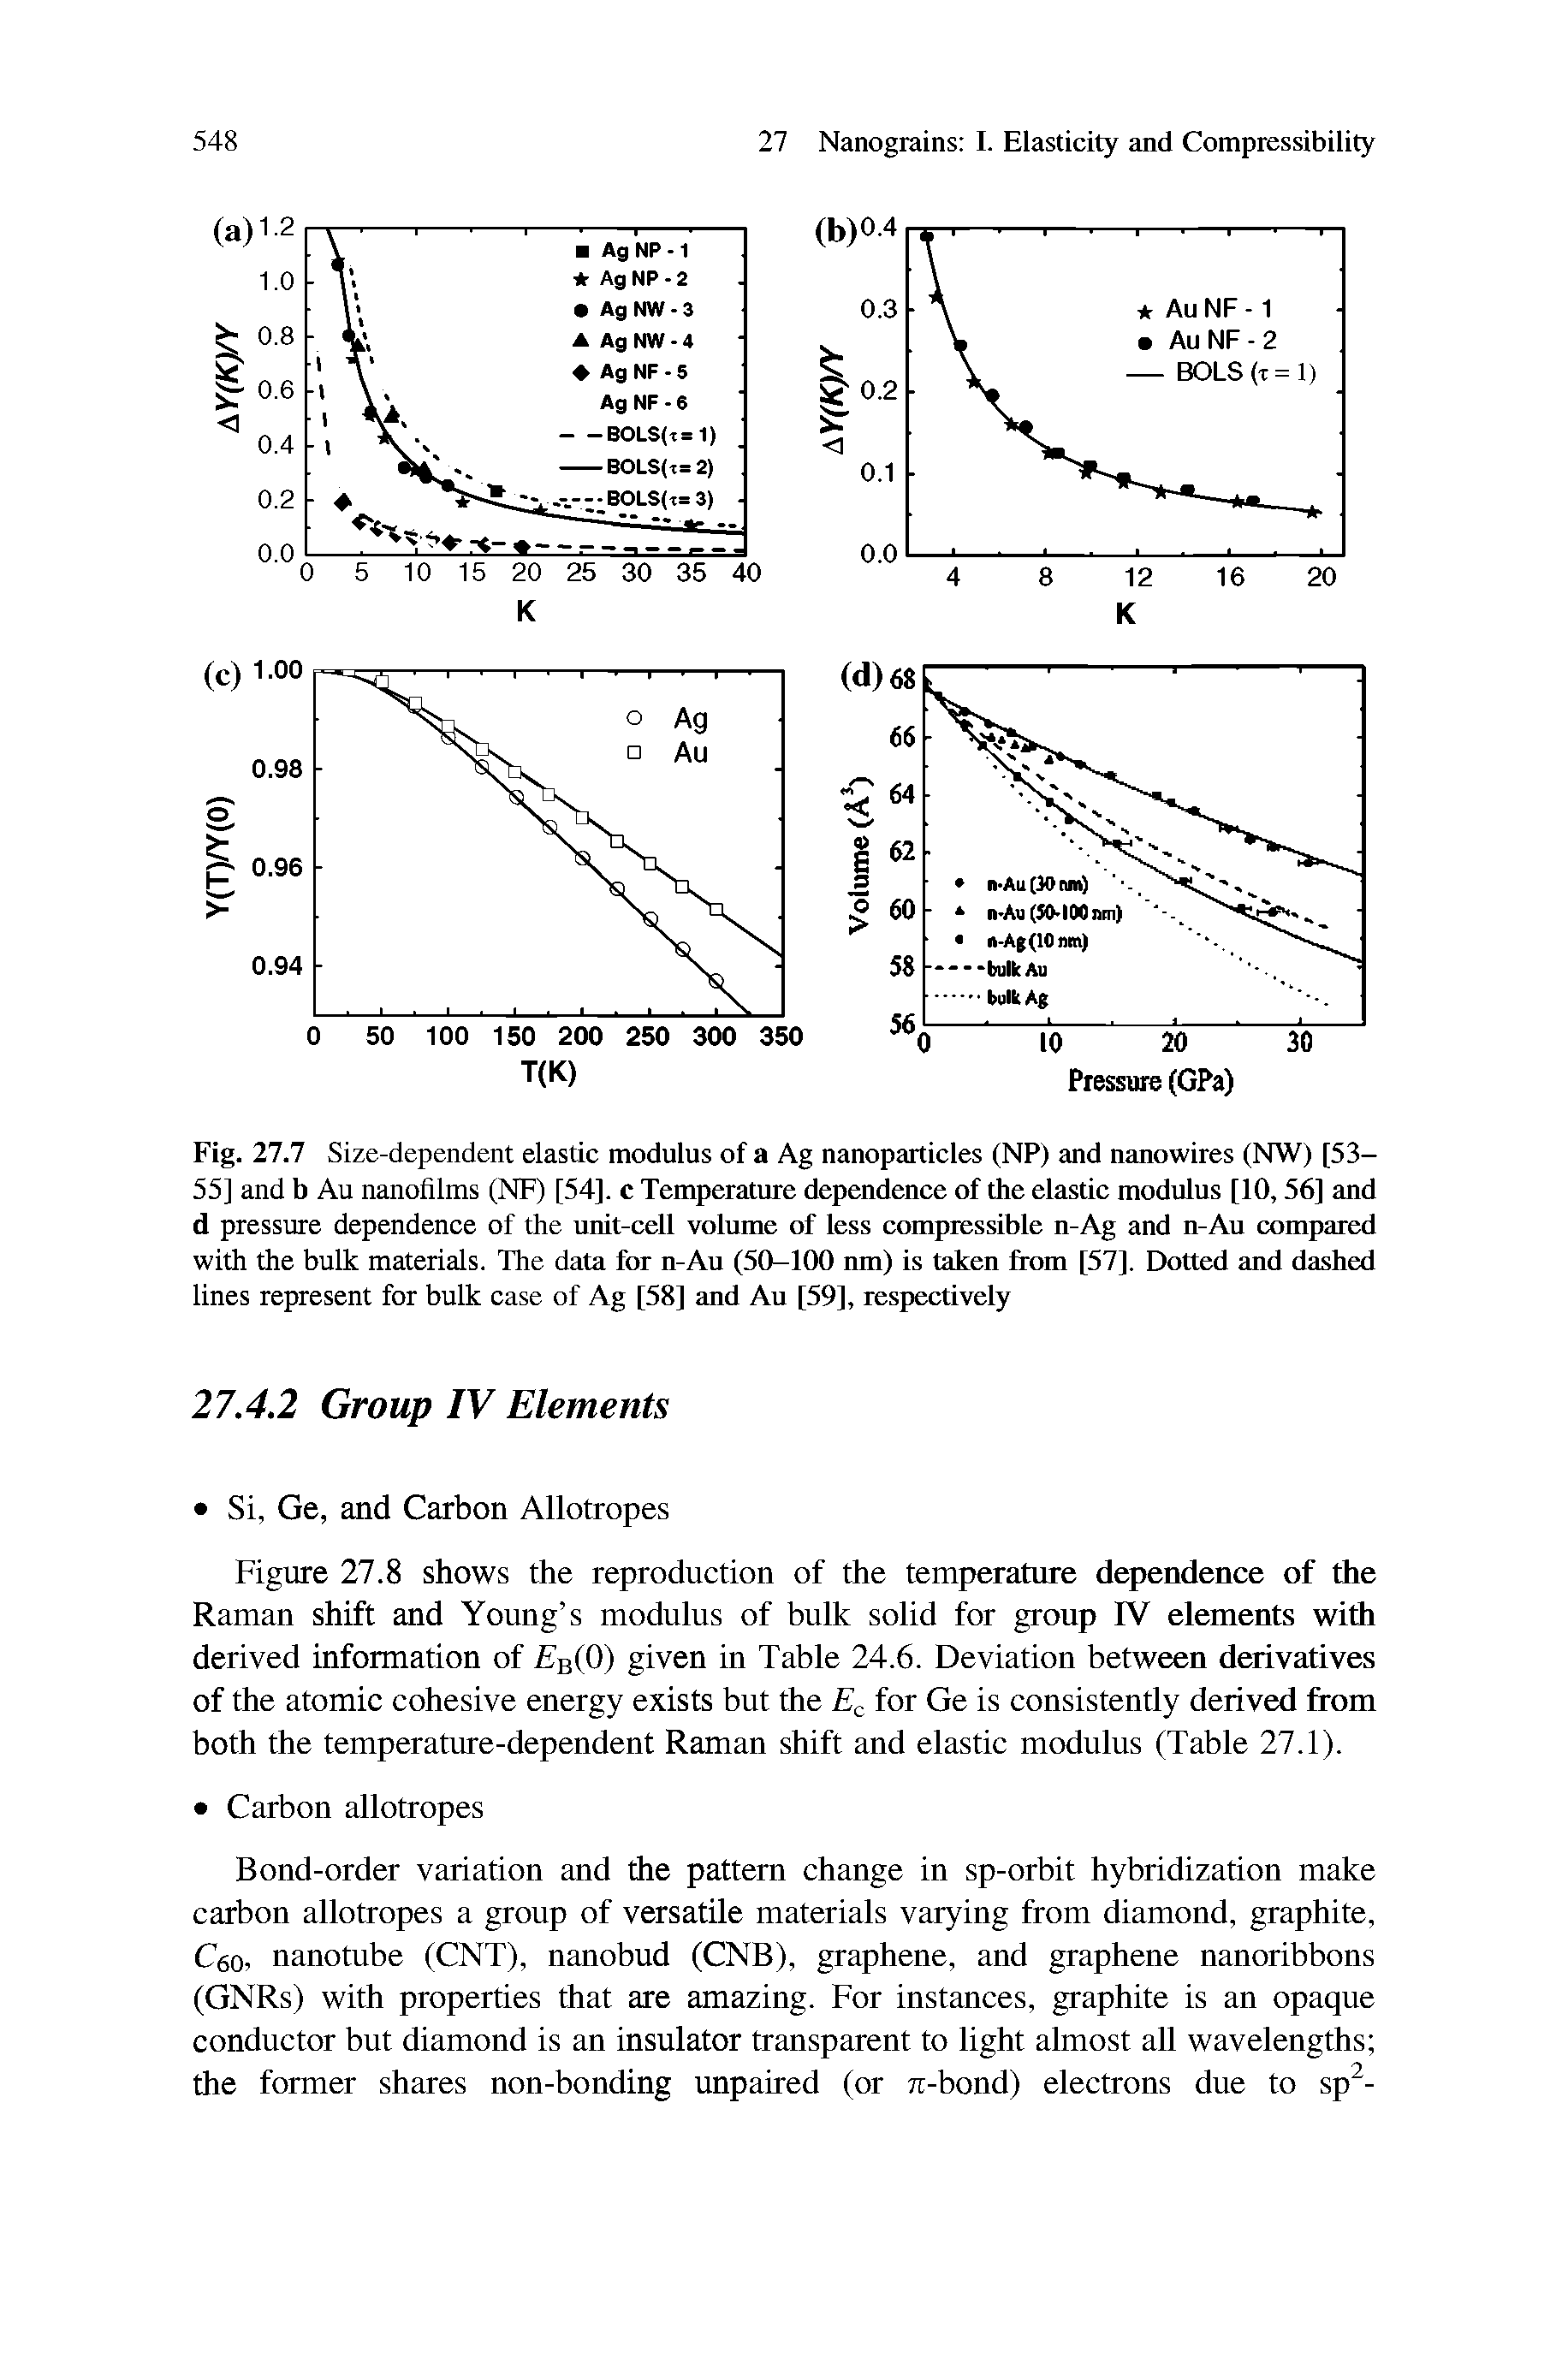 Fig. 27.7 Size-dependent elastic modulus of a Ag nanoparticles (NP) and nanowires (NW) [53-55] and b Au nanofilms (NF) [54]. c Temperature dependence of the elastic modulus [10,56] and d pressure dependence of the unit-cell volume of less compressible n-Ag and n-Au compared with the bulk materials. The data for n-Au (50-100 nm) is taken from [57], Dotted and dashed lines represent for bulk case of Ag [58] and Au [59], respectively...